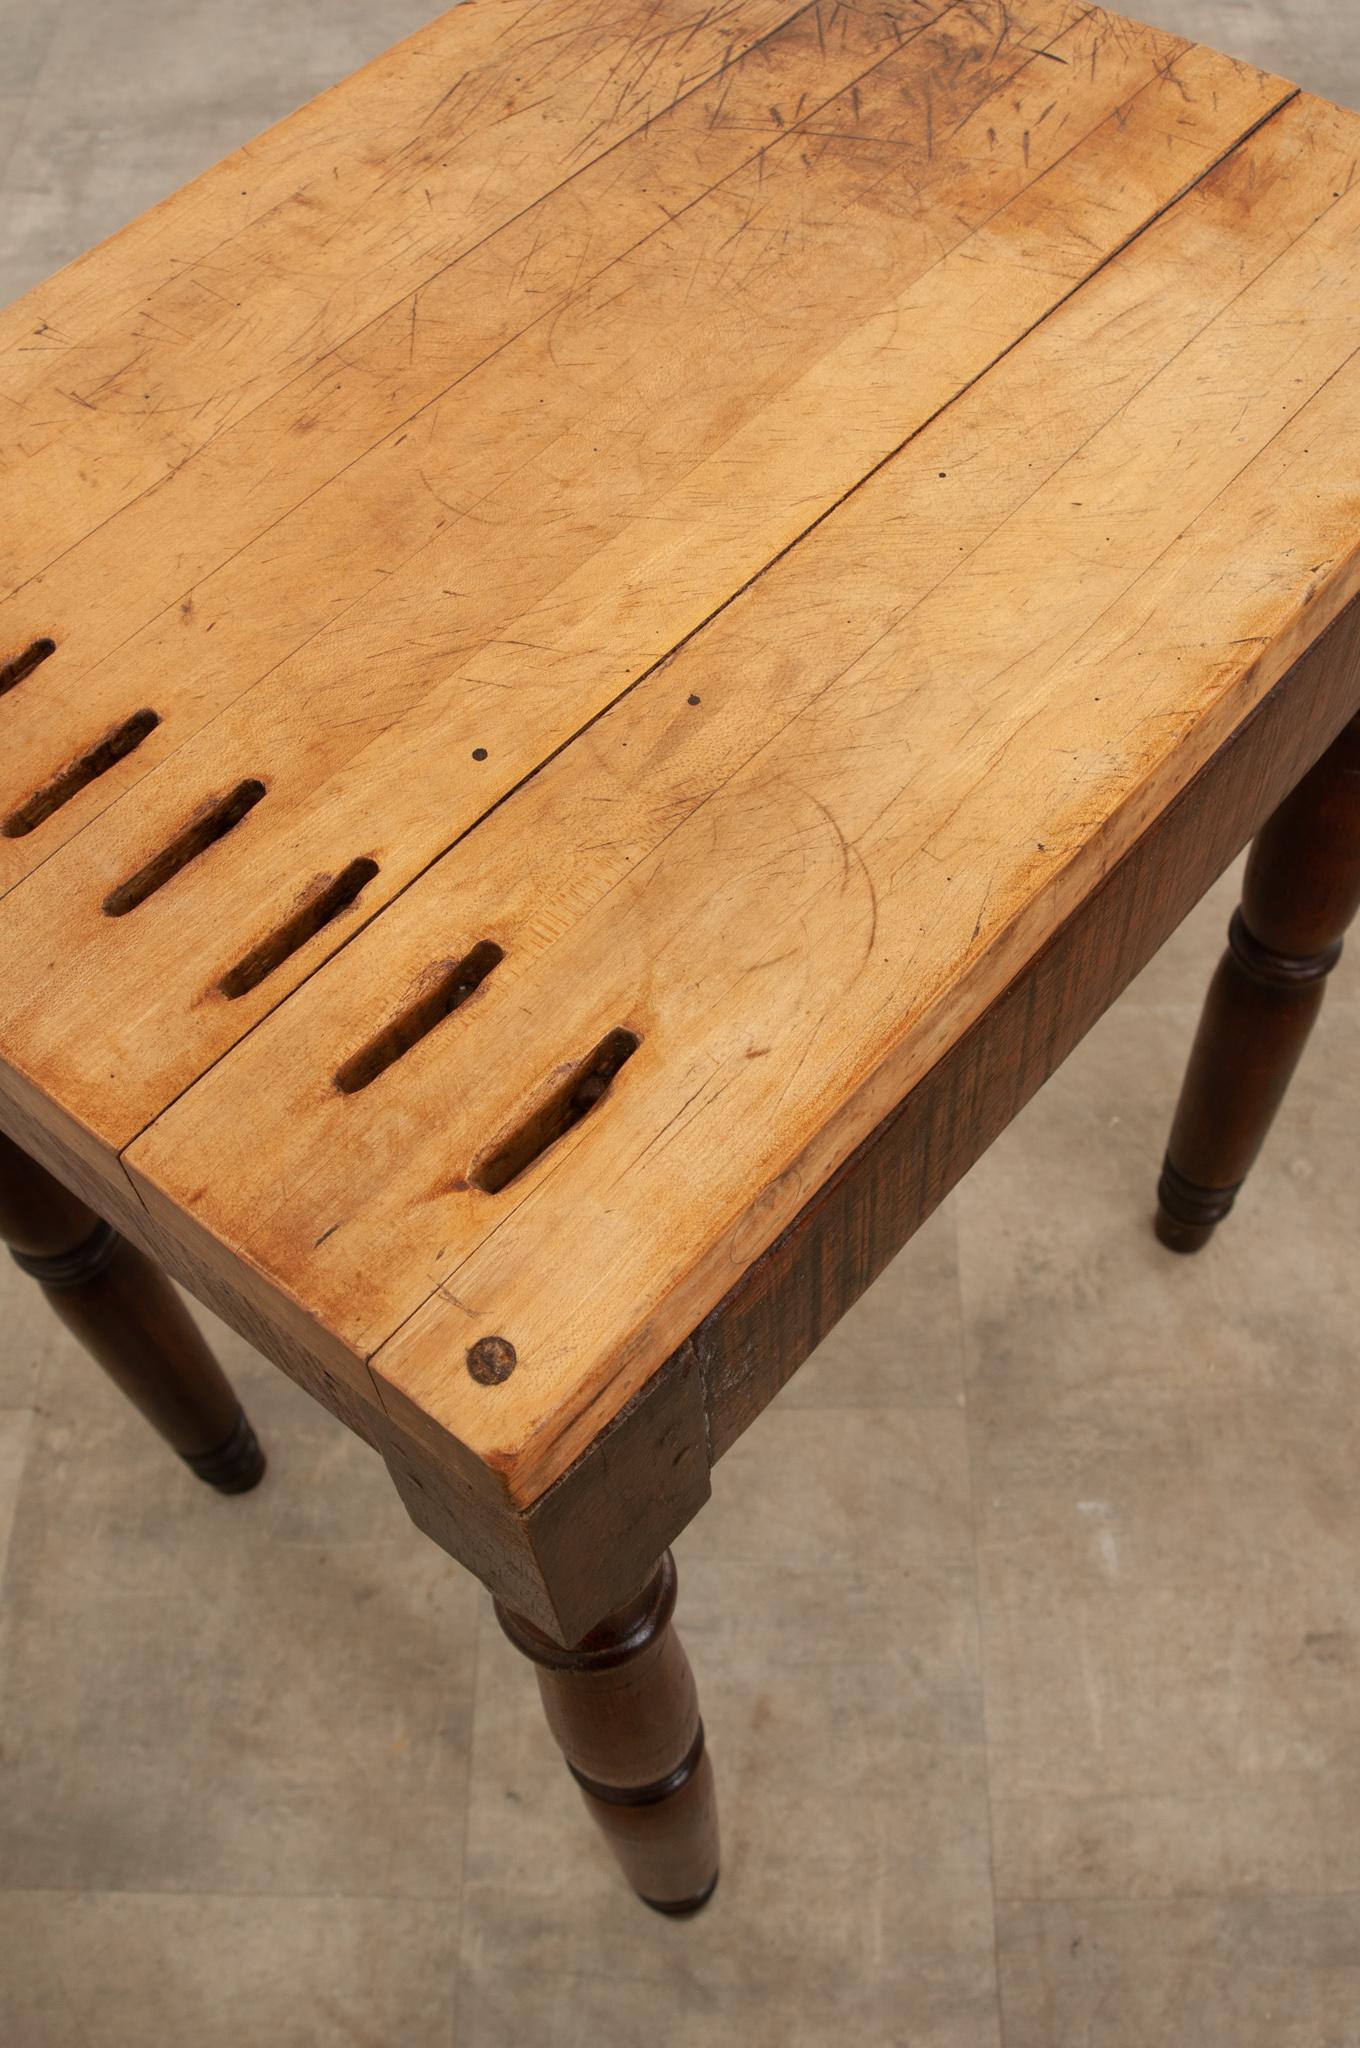 19th Century French Beech Charcuterie Table with Knife Slots